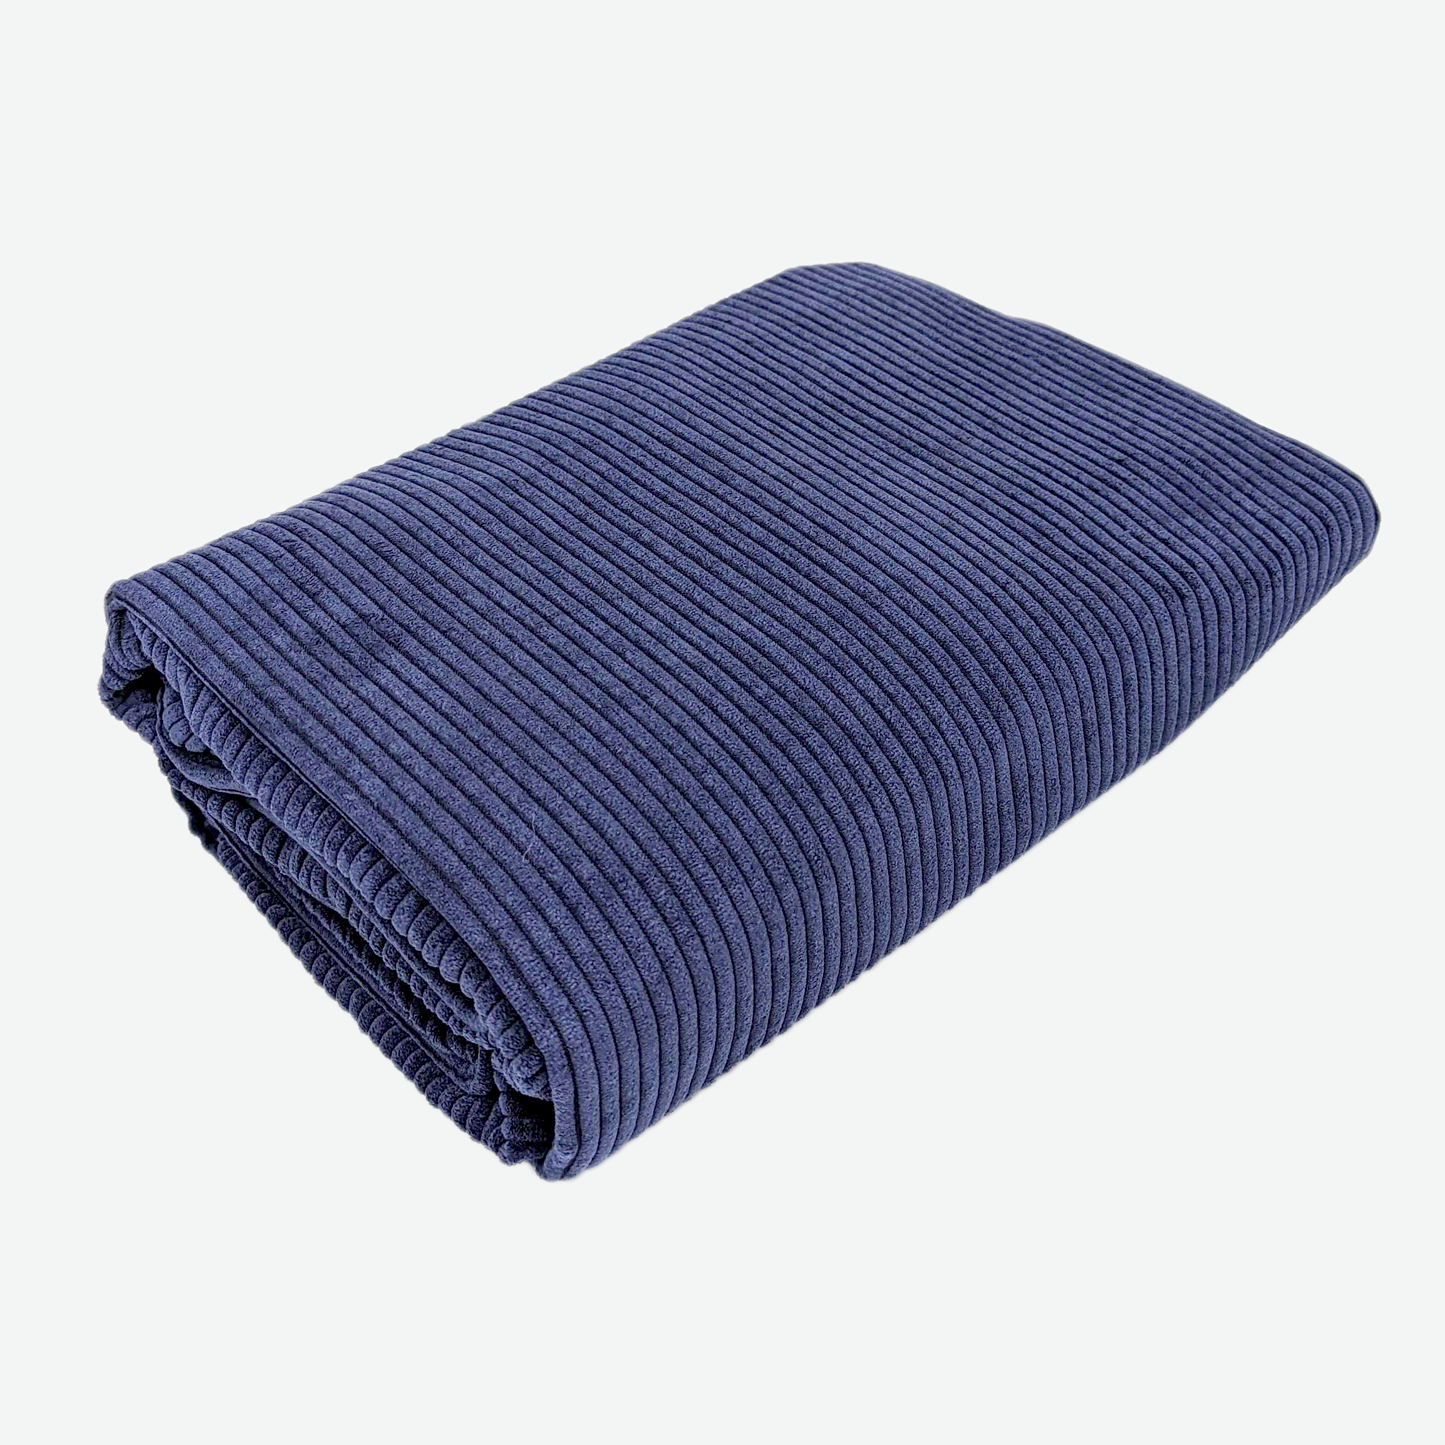 Supplementry cloud dog bed cover, navy blue